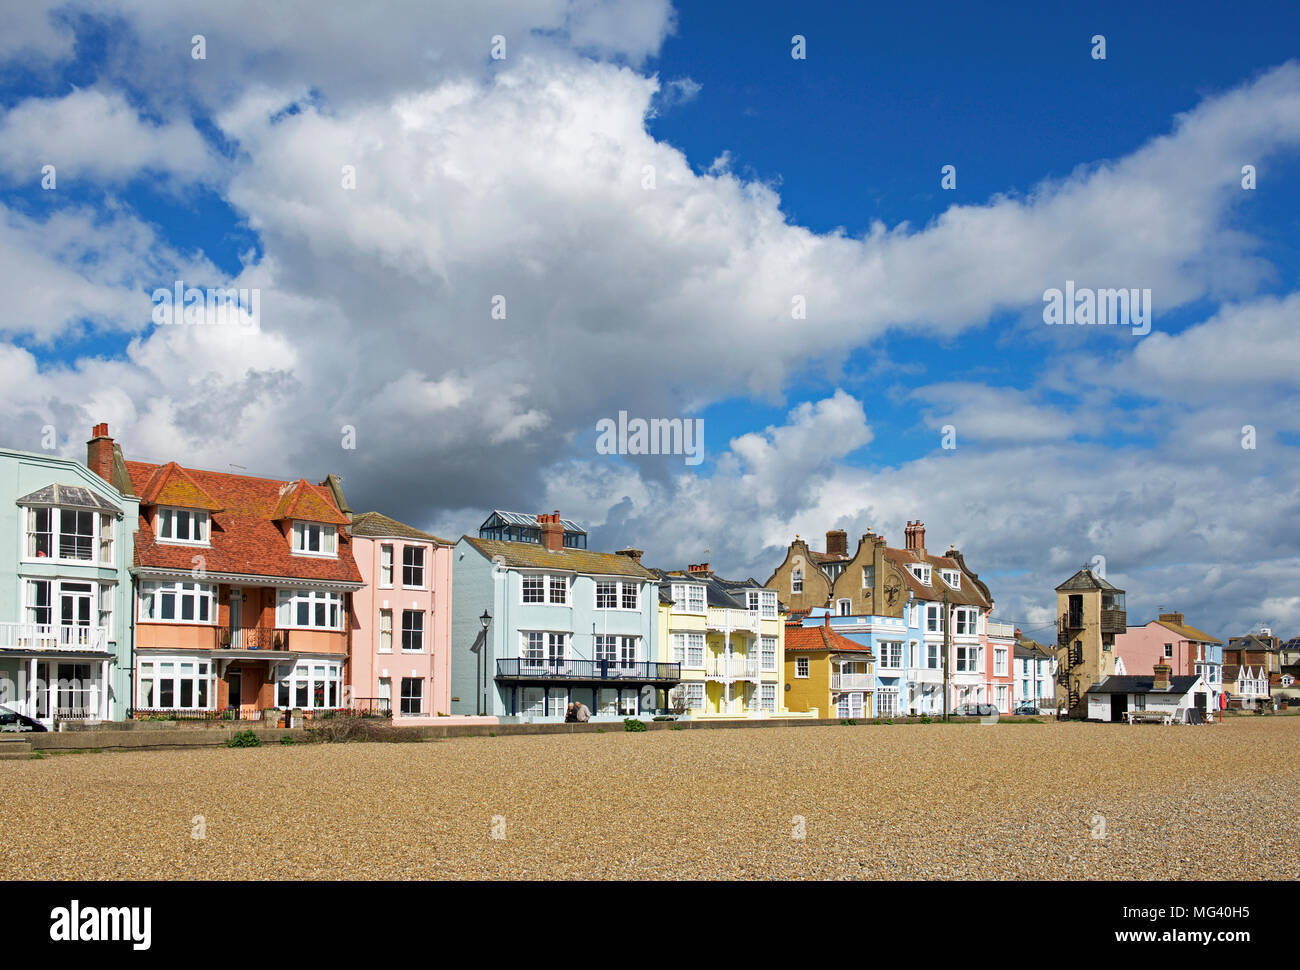 The sea front and beach, Aldeburgh, Suffolk, England UK Stock Photo